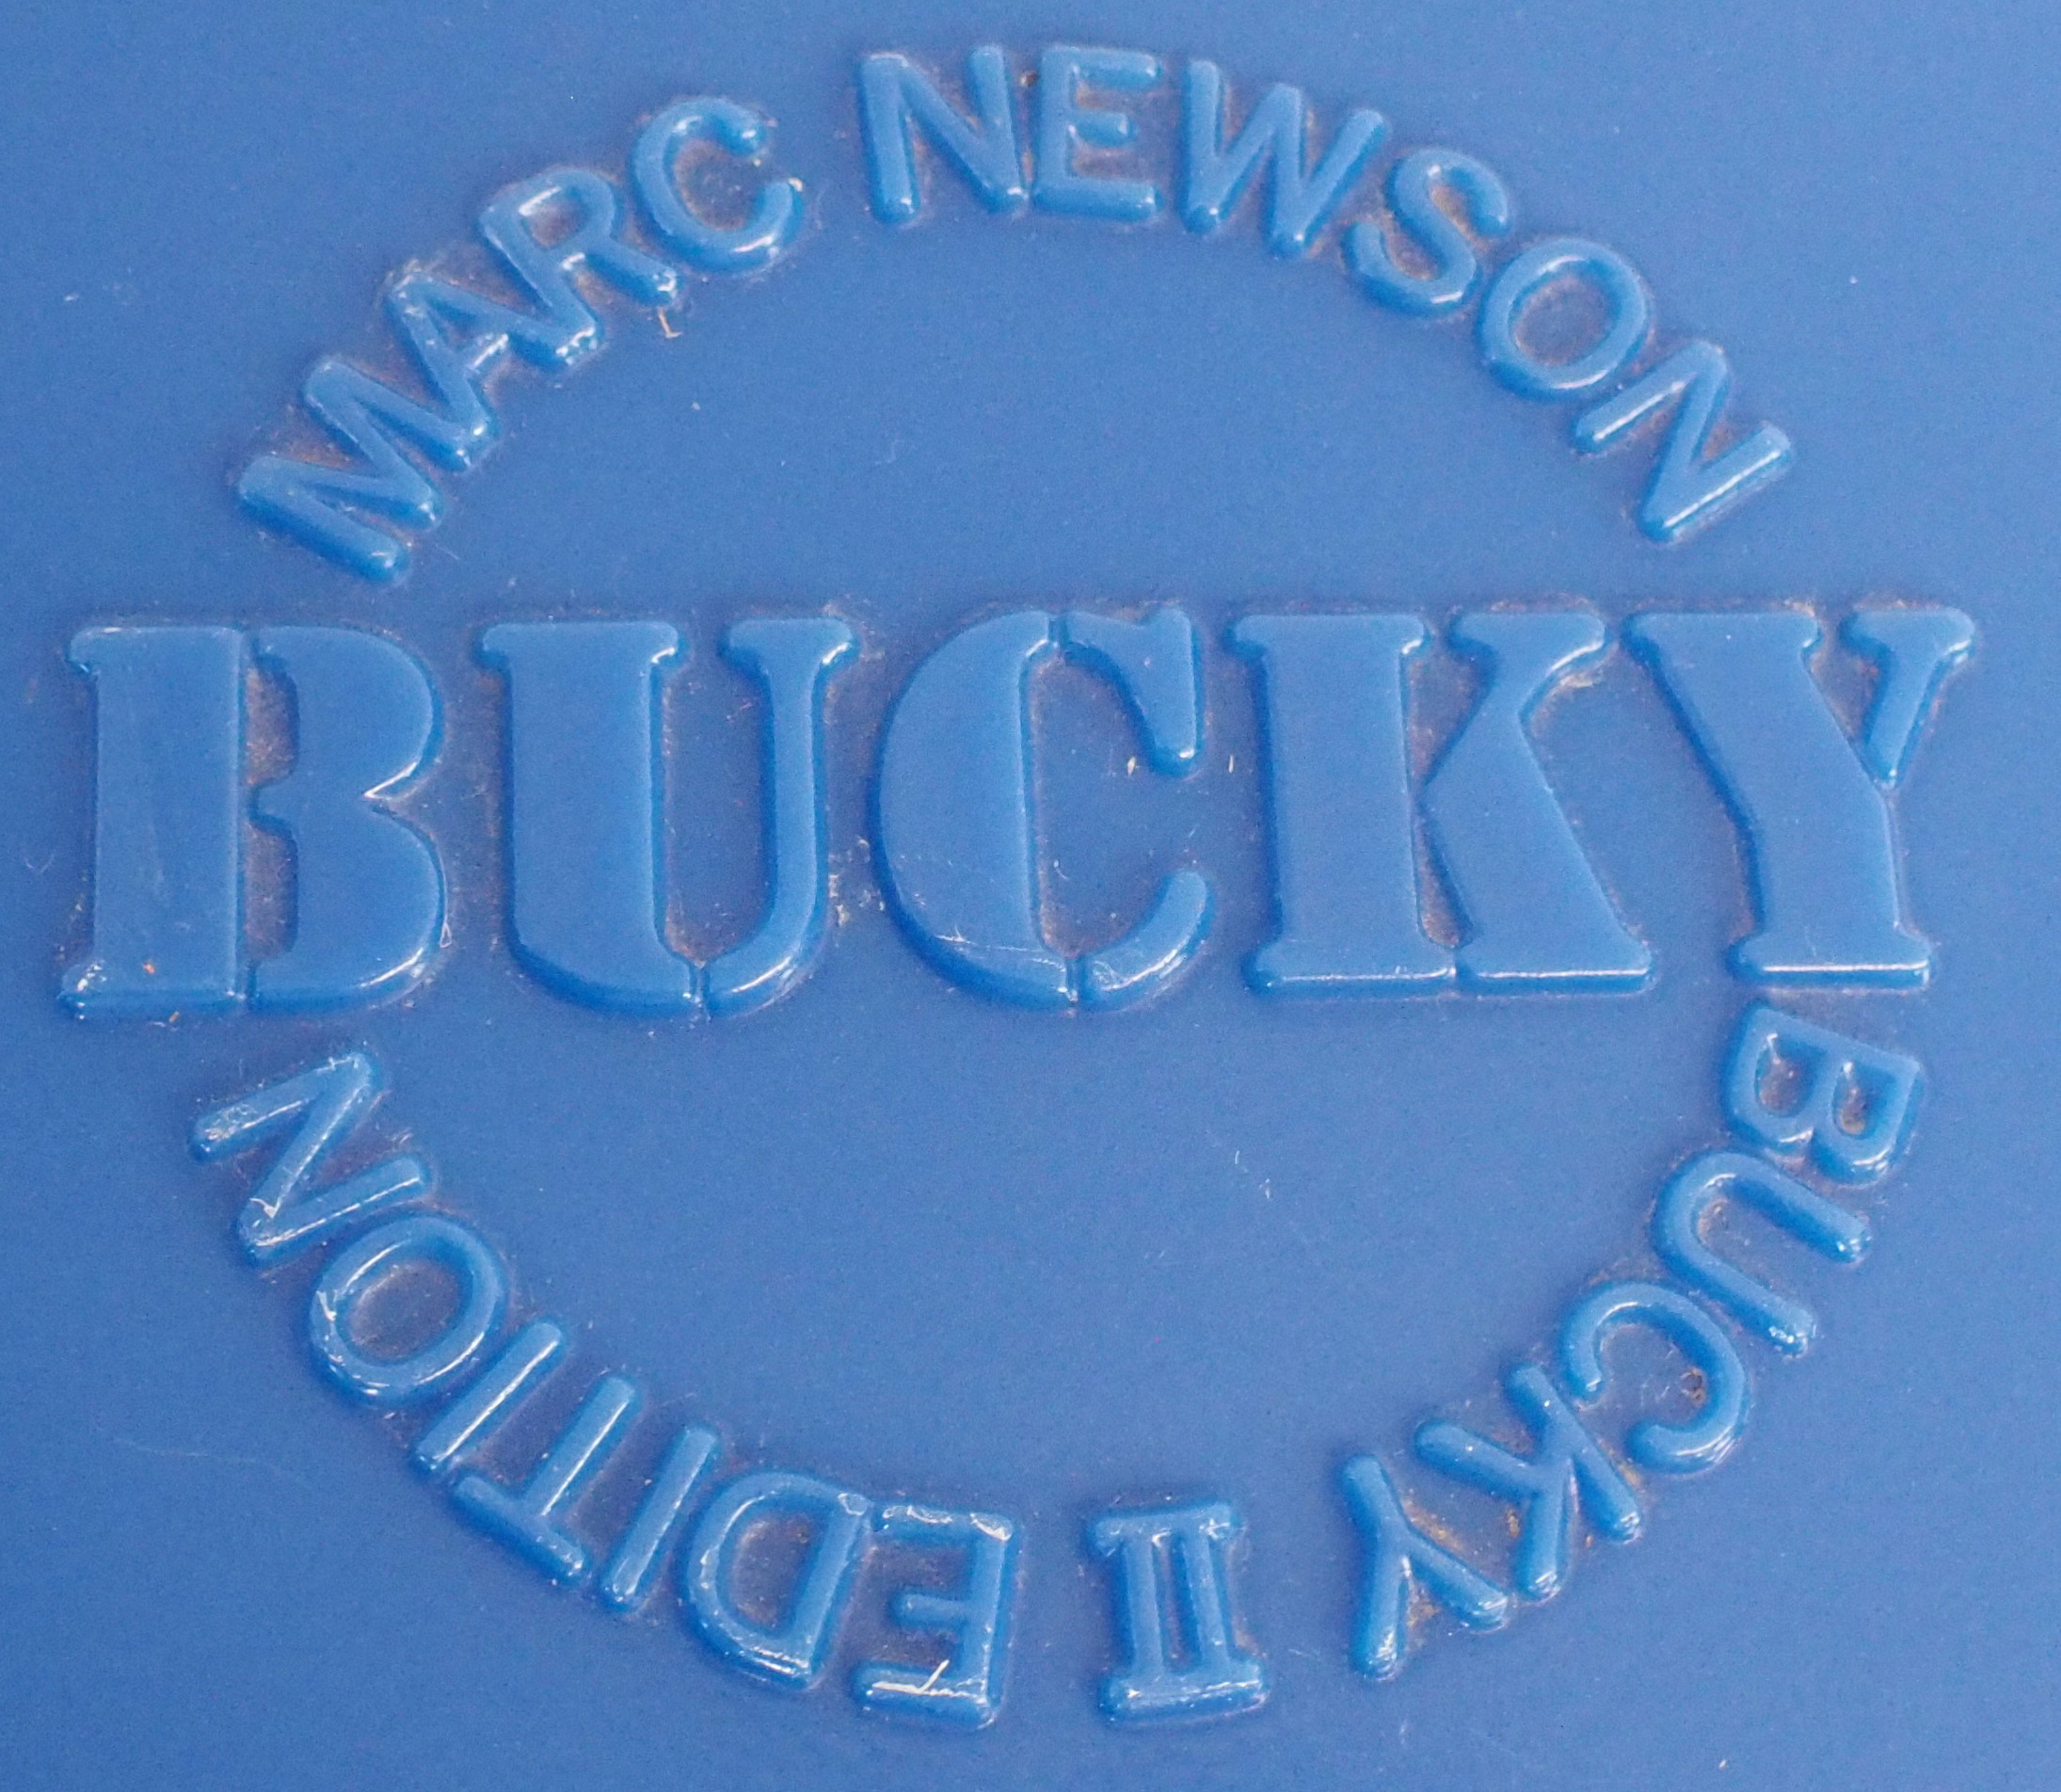 A MARC NESON BLUE "BUCKY" CHAIR II EDITION 97cm wide, the moulded plastic chair was designed for the - Image 6 of 10